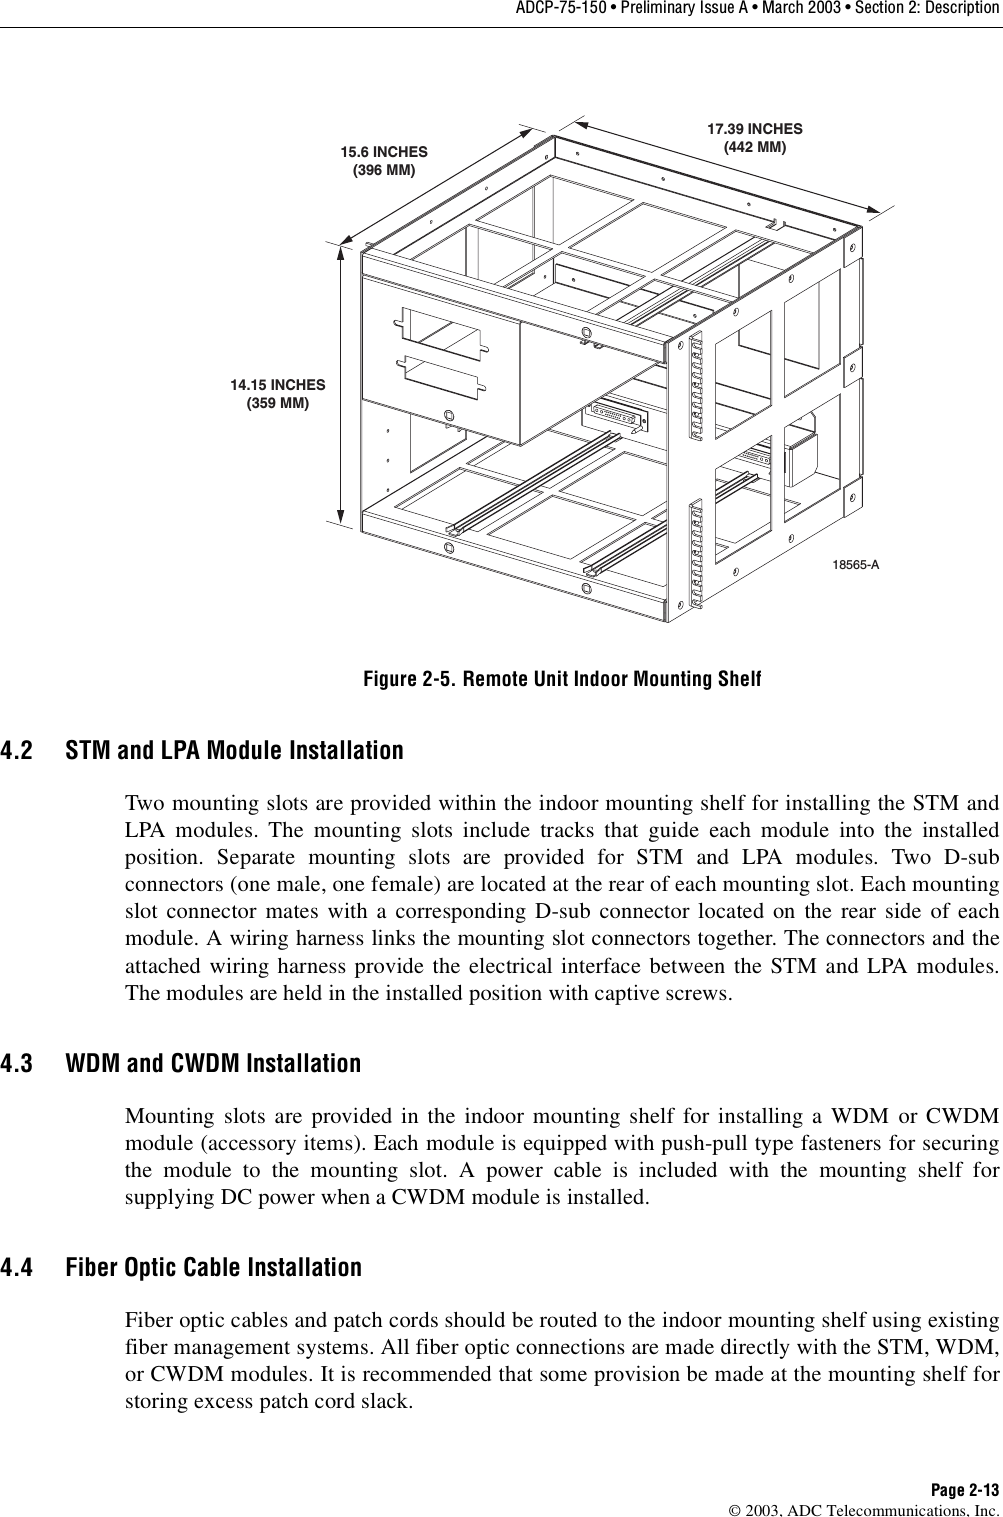 ADCP-75-150 • Preliminary Issue A • March 2003 • Section 2: DescriptionPage 2-13©2003, ADC Telecommunications, Inc.Figure 2-5. Remote Unit Indoor Mounting Shelf4.2 STM and LPA Module InstallationTwo mounting slots are provided within the indoor mounting shelf for installing the STM andLPA modules. The mounting slots include tracks that guide each module into the installedposition. Separate mounting slots are provided for STM and LPA modules. Two D-subconnectors (one male, one female) are located at the rear of each mounting slot. Each mountingslot connector mates with acorresponding D-sub connector located on the rear side of eachmodule. Awiring harness links the mounting slot connectors together. The connectors and theattached wiring harness provide the electrical interface between the STM and LPA modules.The modules are held in the installed position with captive screws.4.3 WDM and CWDM InstallationMounting slots are provided in the indoor mounting shelf for installing aWDM or CWDMmodule (accessory items). Each module is equipped with push-pull type fasteners for securingthe module to the mounting slot. Apower cable is included with the mounting shelf forsupplying DC power when aCWDM module is installed.4.4 Fiber Optic Cable InstallationFiber optic cables and patch cords should be routed to the indoor mounting shelf using existingfiber management systems. All fiber optic connections are made directly with the STM, WDM,or CWDM modules. It is recommended that some provision be made at the mounting shelf forstoring excess patch cord slack.18565-A14.15 INCHES(359 MM)15.6 INCHES(396 MM)17.39 INCHES(442 MM)